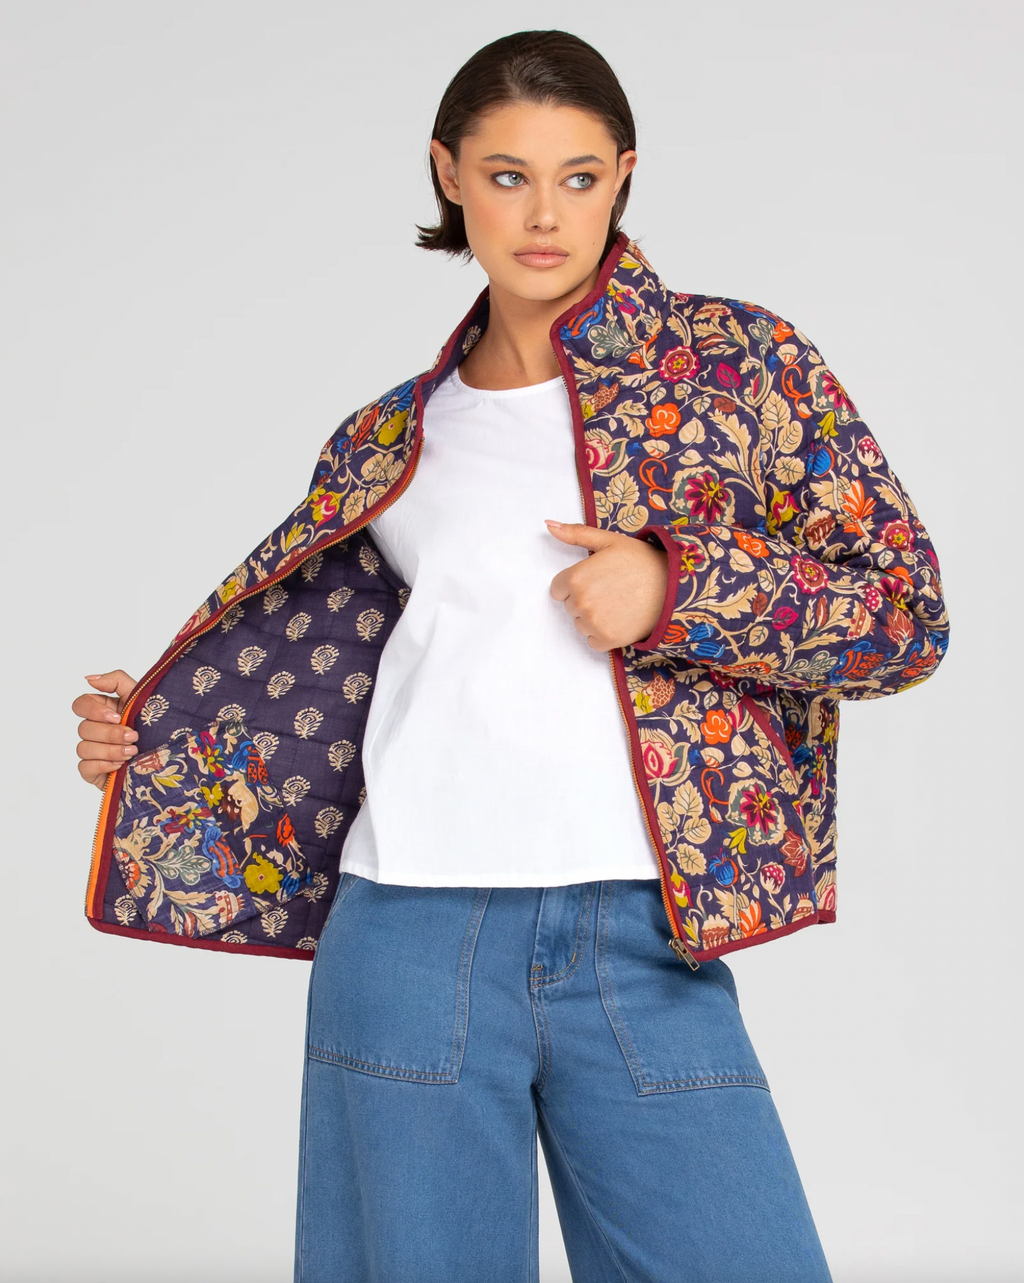 the cella quilted jacket by boom shankar is a cotton block printed boho floral zip up cotton jacket online at jipsi cartel